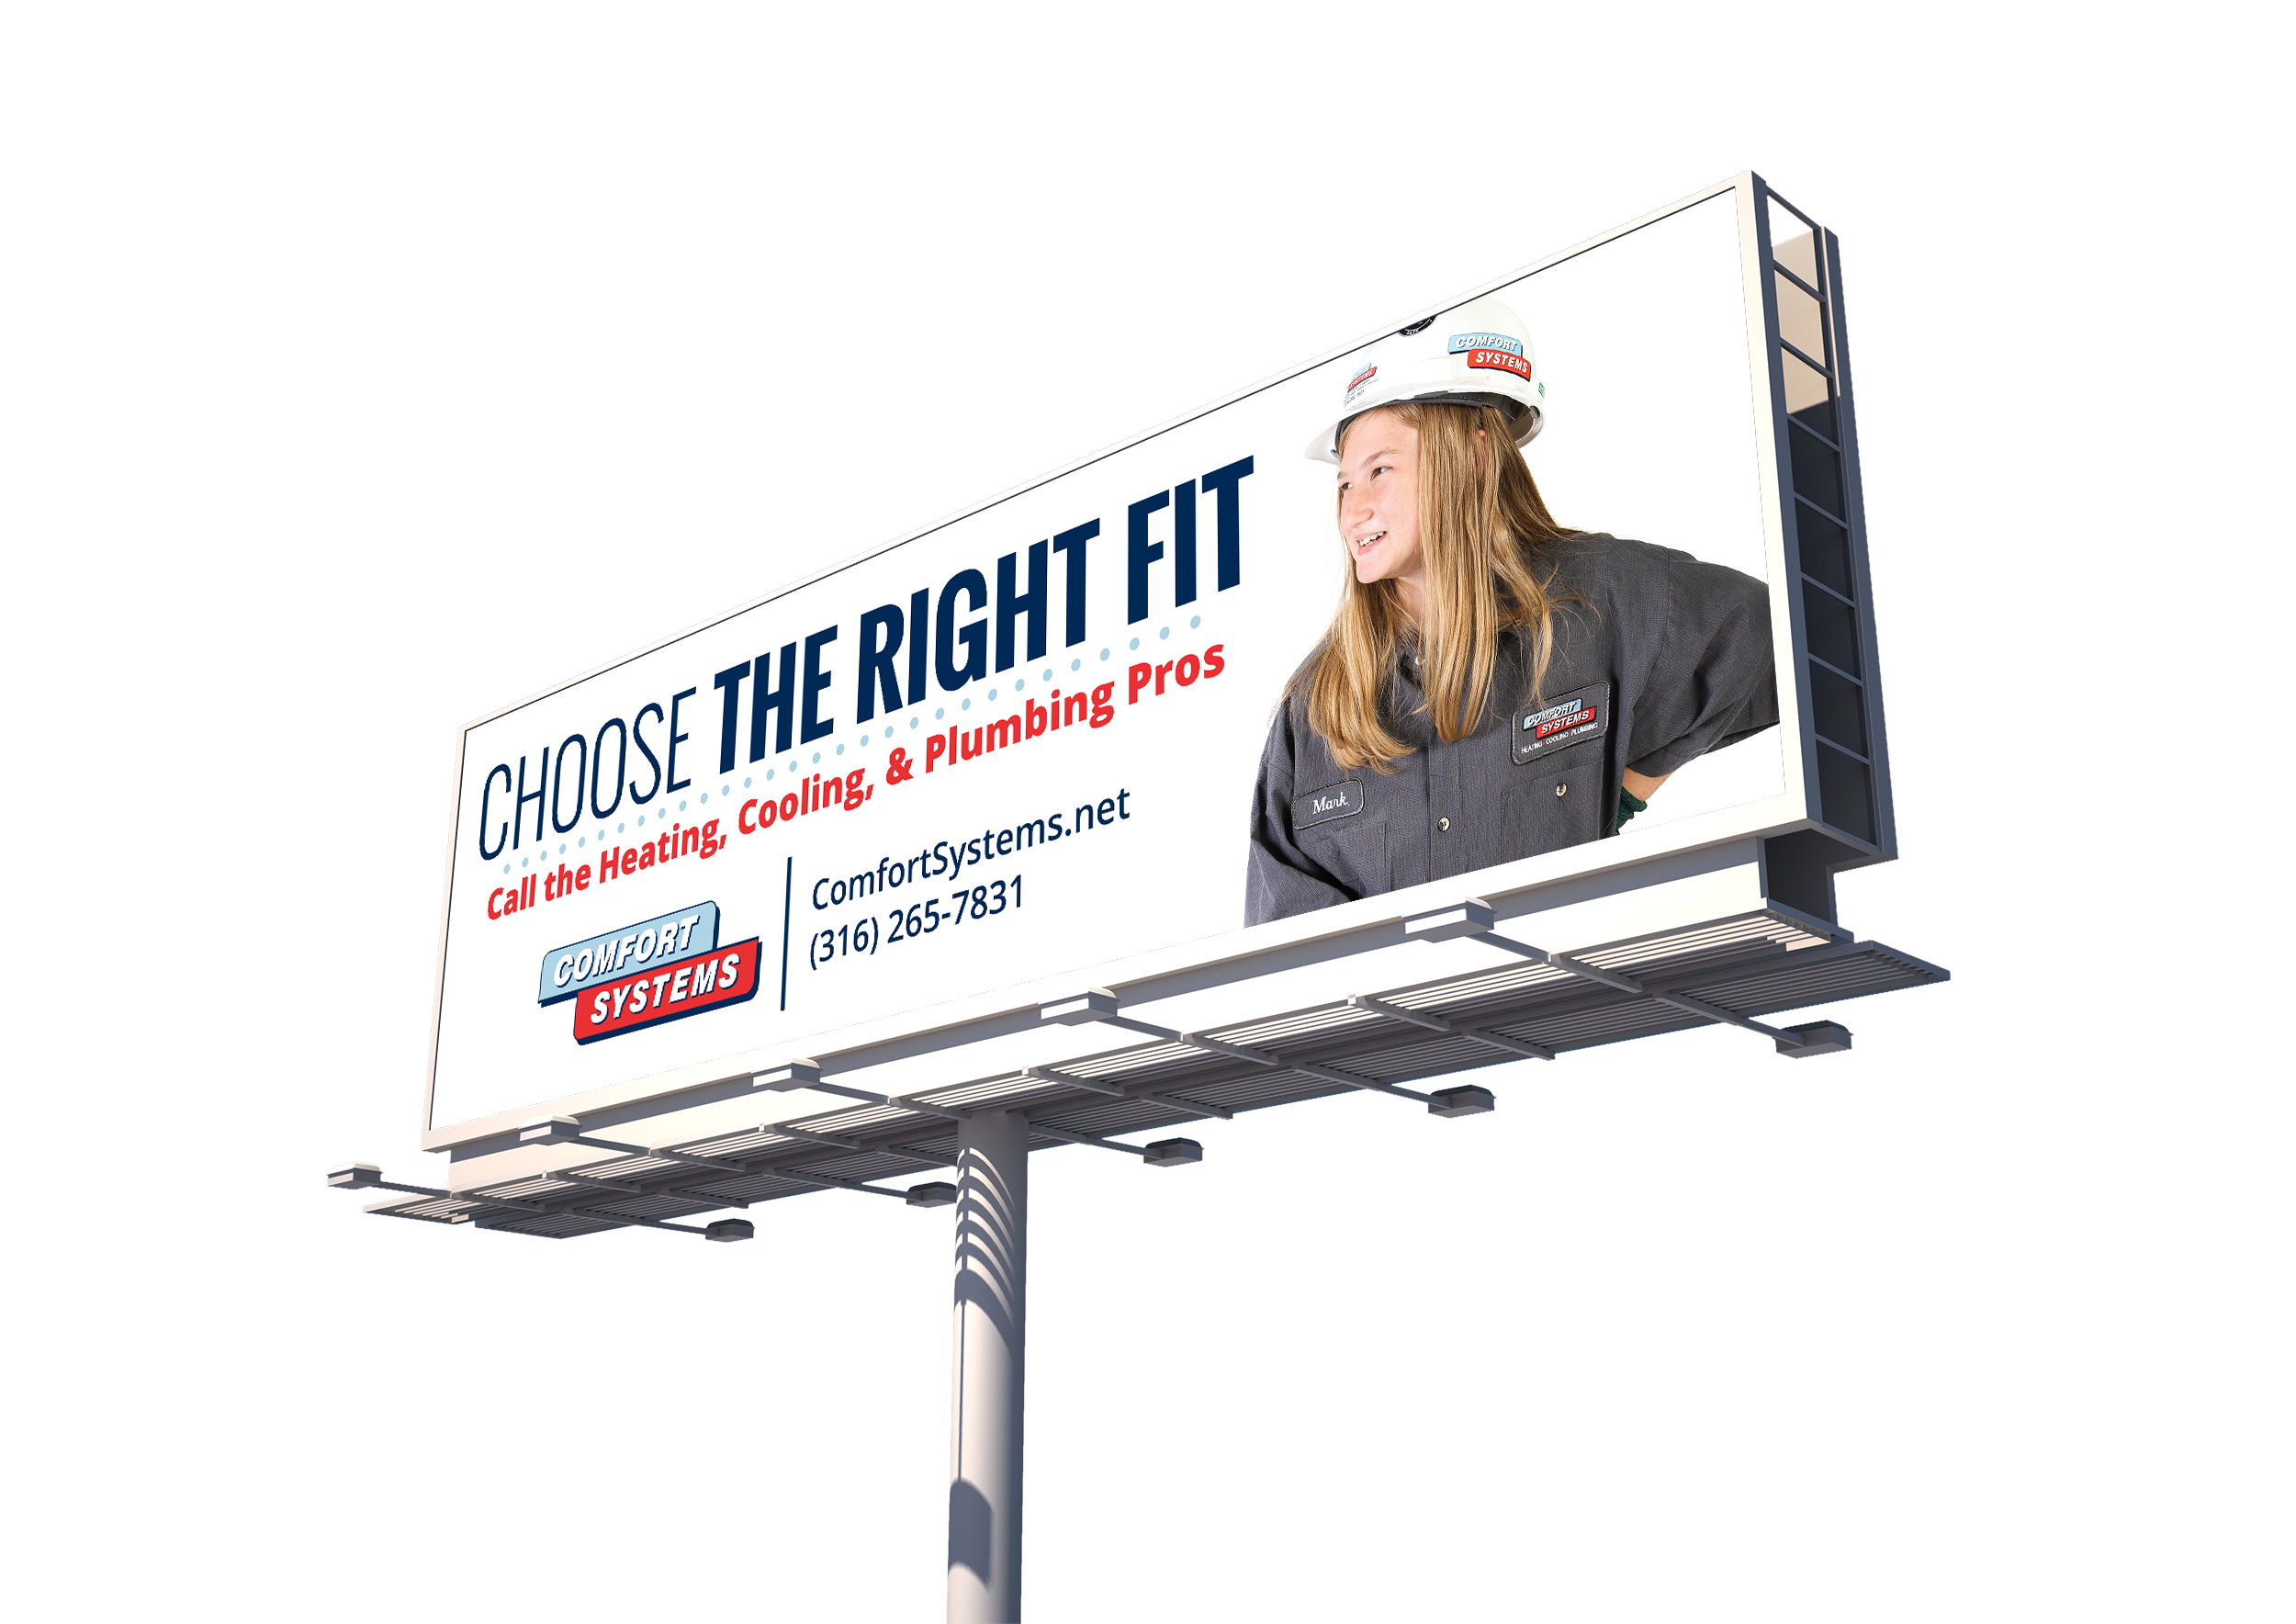 Choose the Right Fit Integrated Advertising Campaign